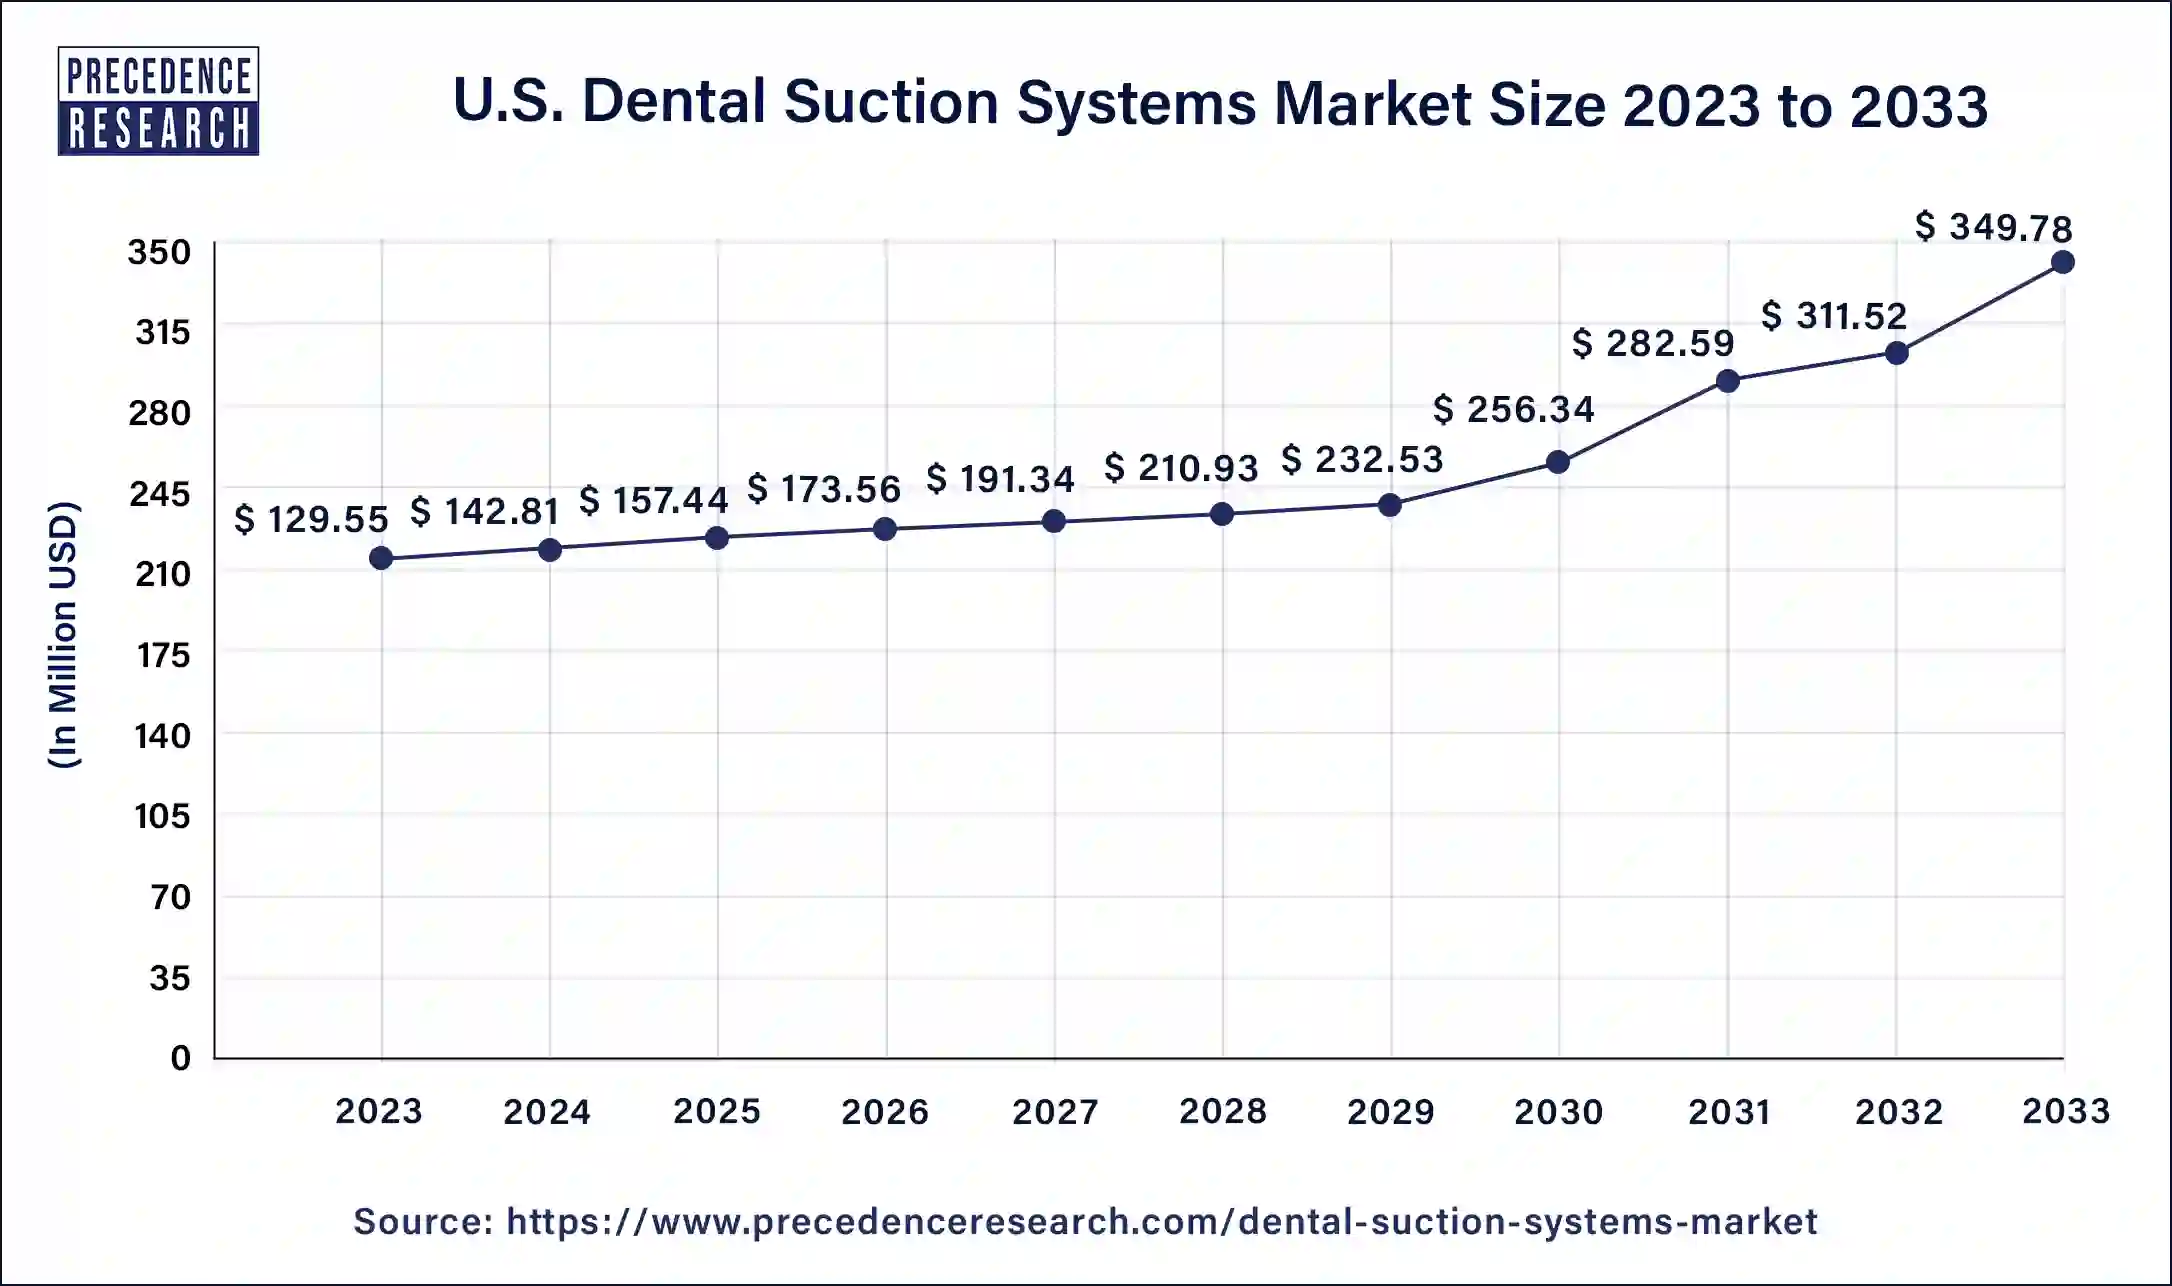 U.S. Dental Suction Systems Market Size 2024 to 2033